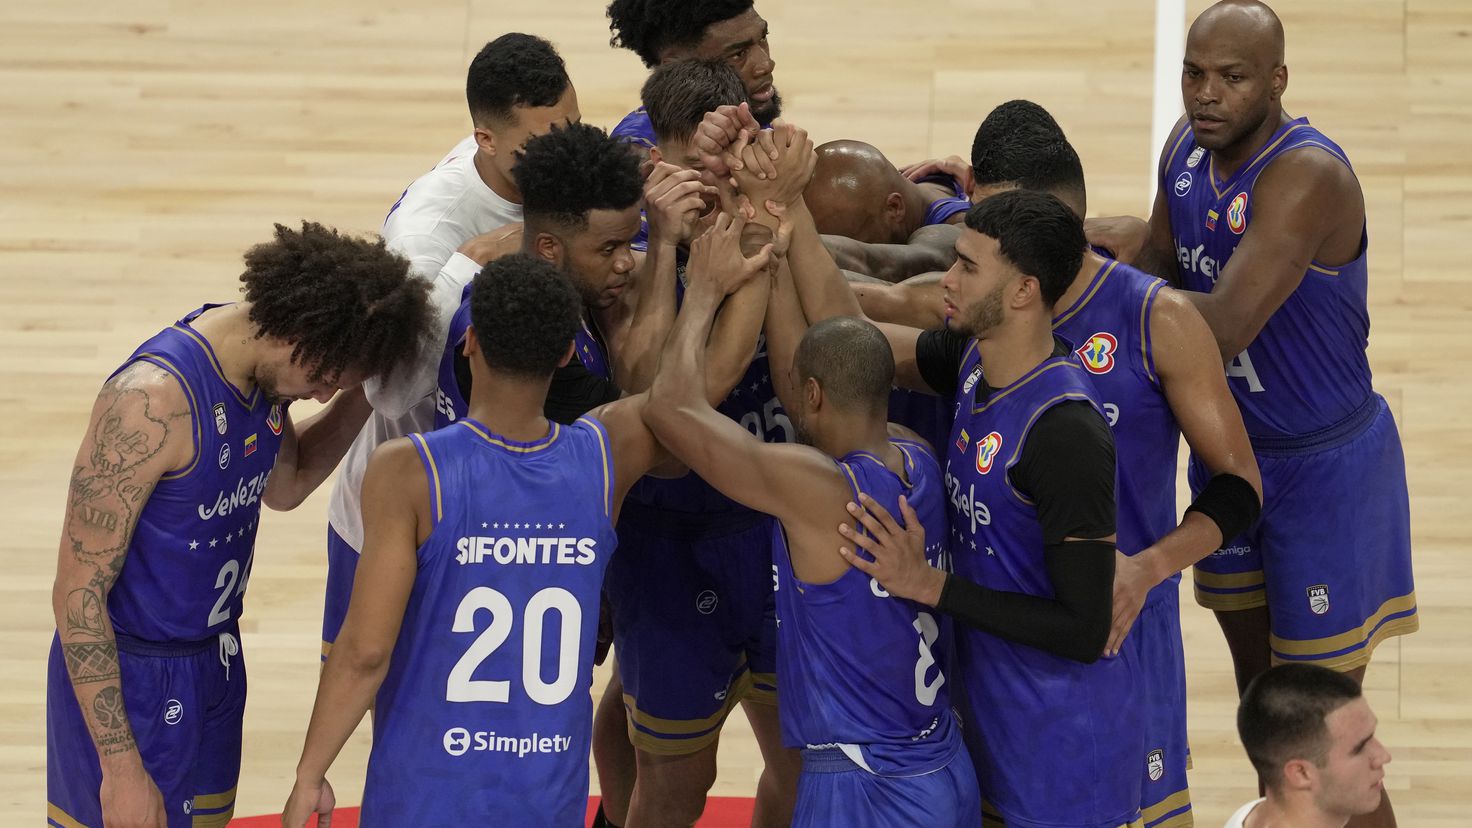 Venezuela’s 2023 FIBA Basketball World Cup roster and schedule Dates